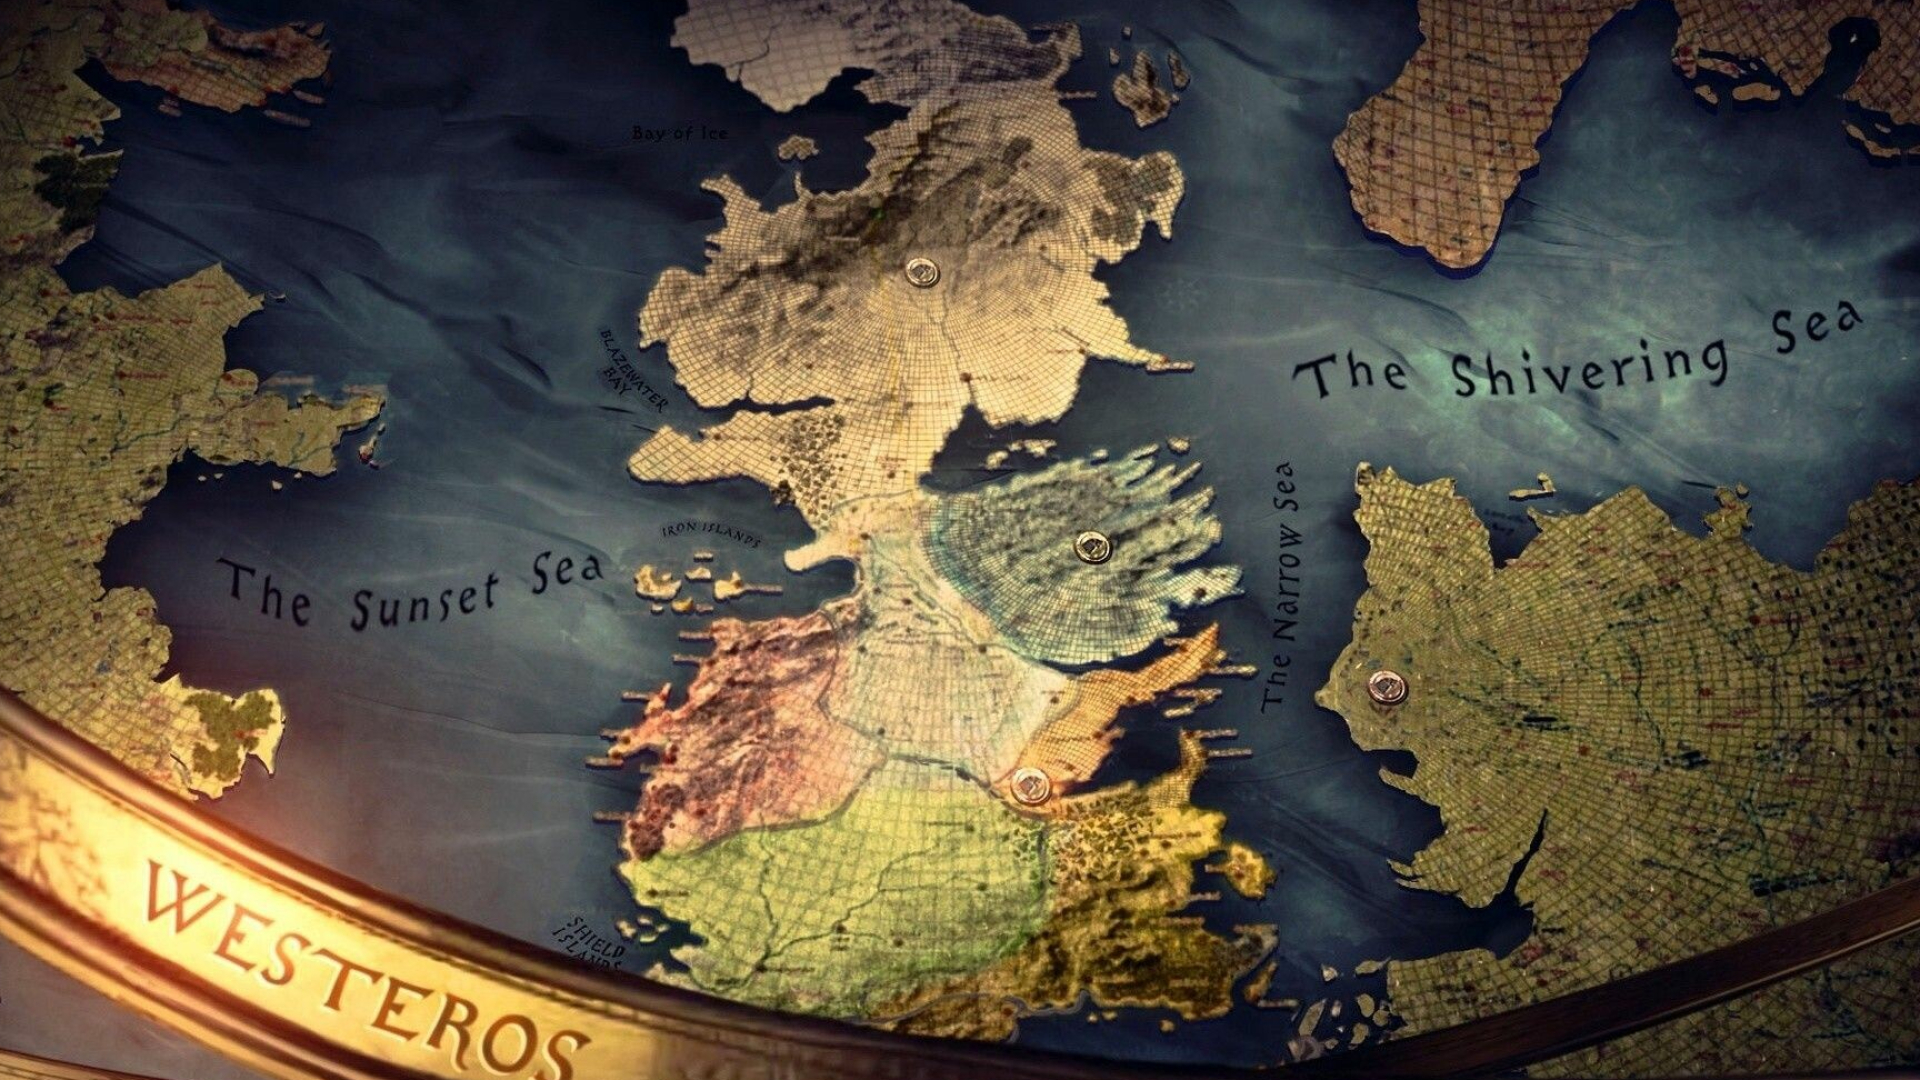 Game of Thrones: Westeros, The Sunset Sea, The Shivering Sea, The Narrow Sea. 1920x1080 Full HD Background.